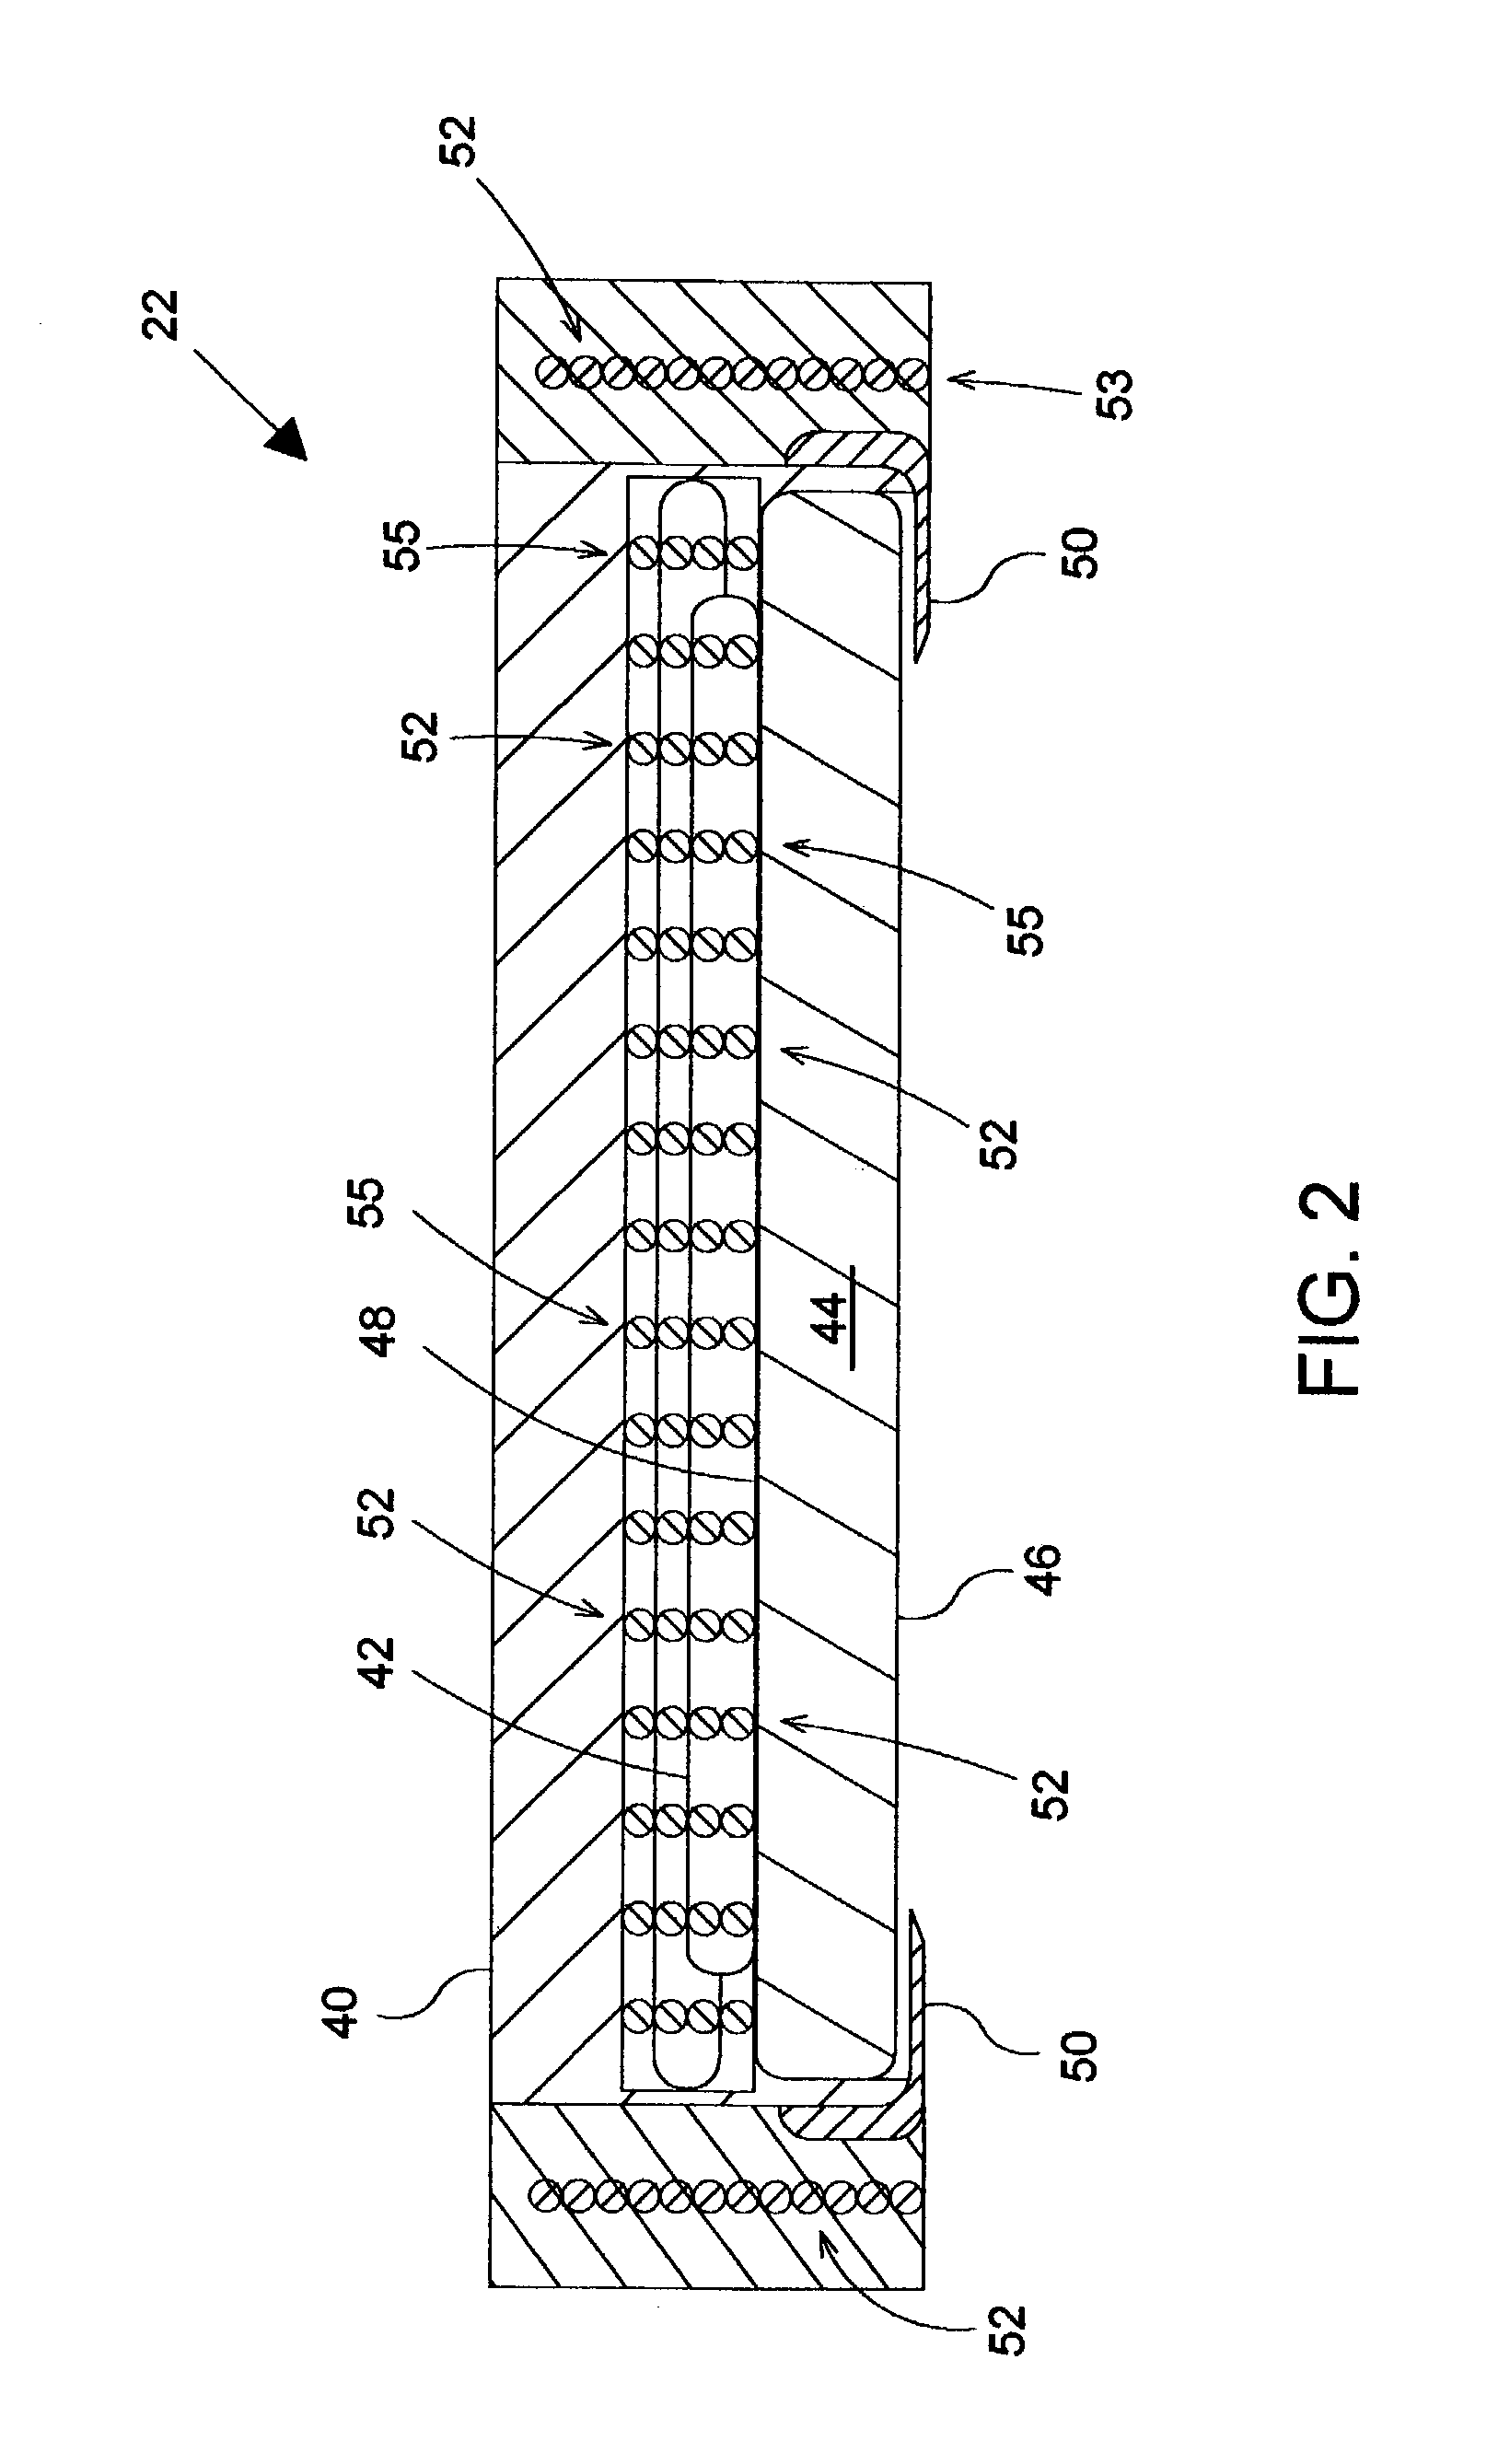 Electroplating tool for semiconductor manufacture having electric field control